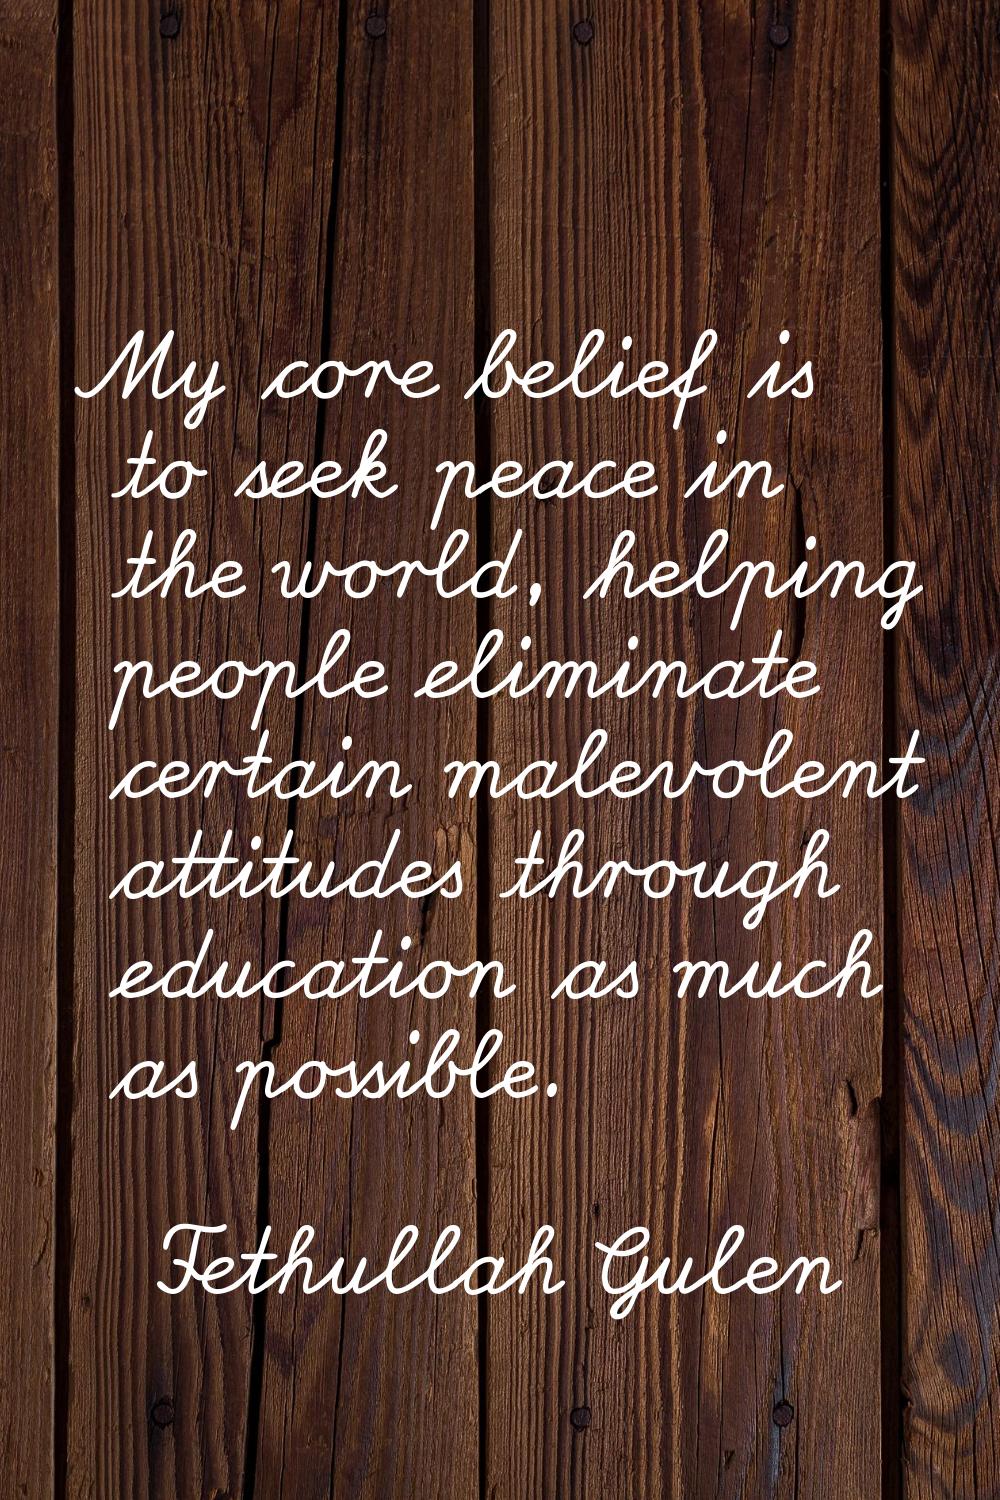 My core belief is to seek peace in the world, helping people eliminate certain malevolent attitudes